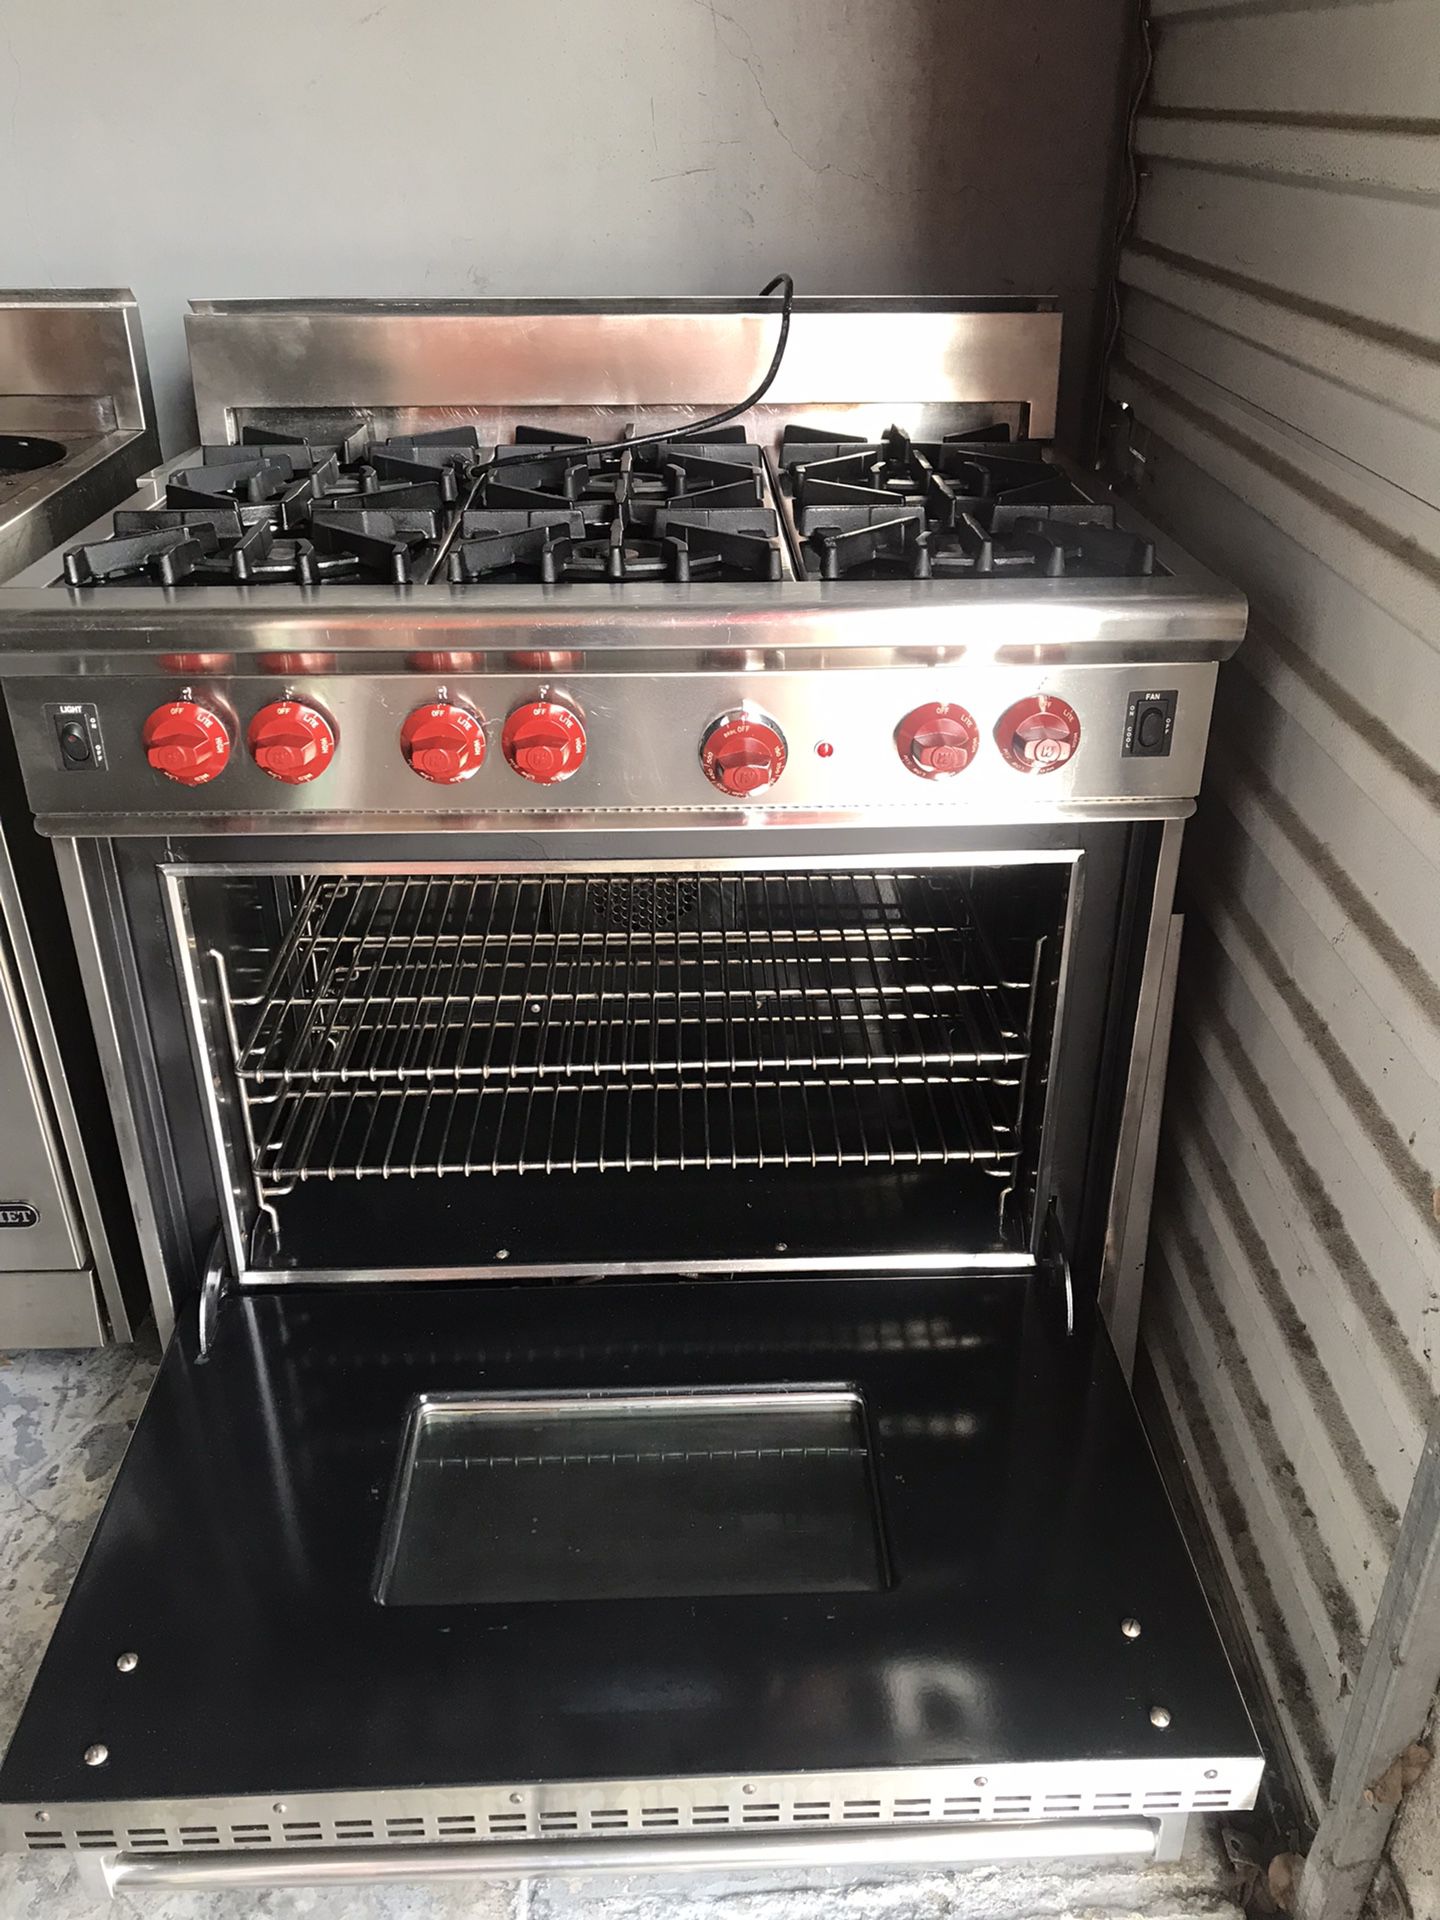 Ninja 3-in-1 Cooking System (MC750) for Sale in Los Altos, CA - OfferUp